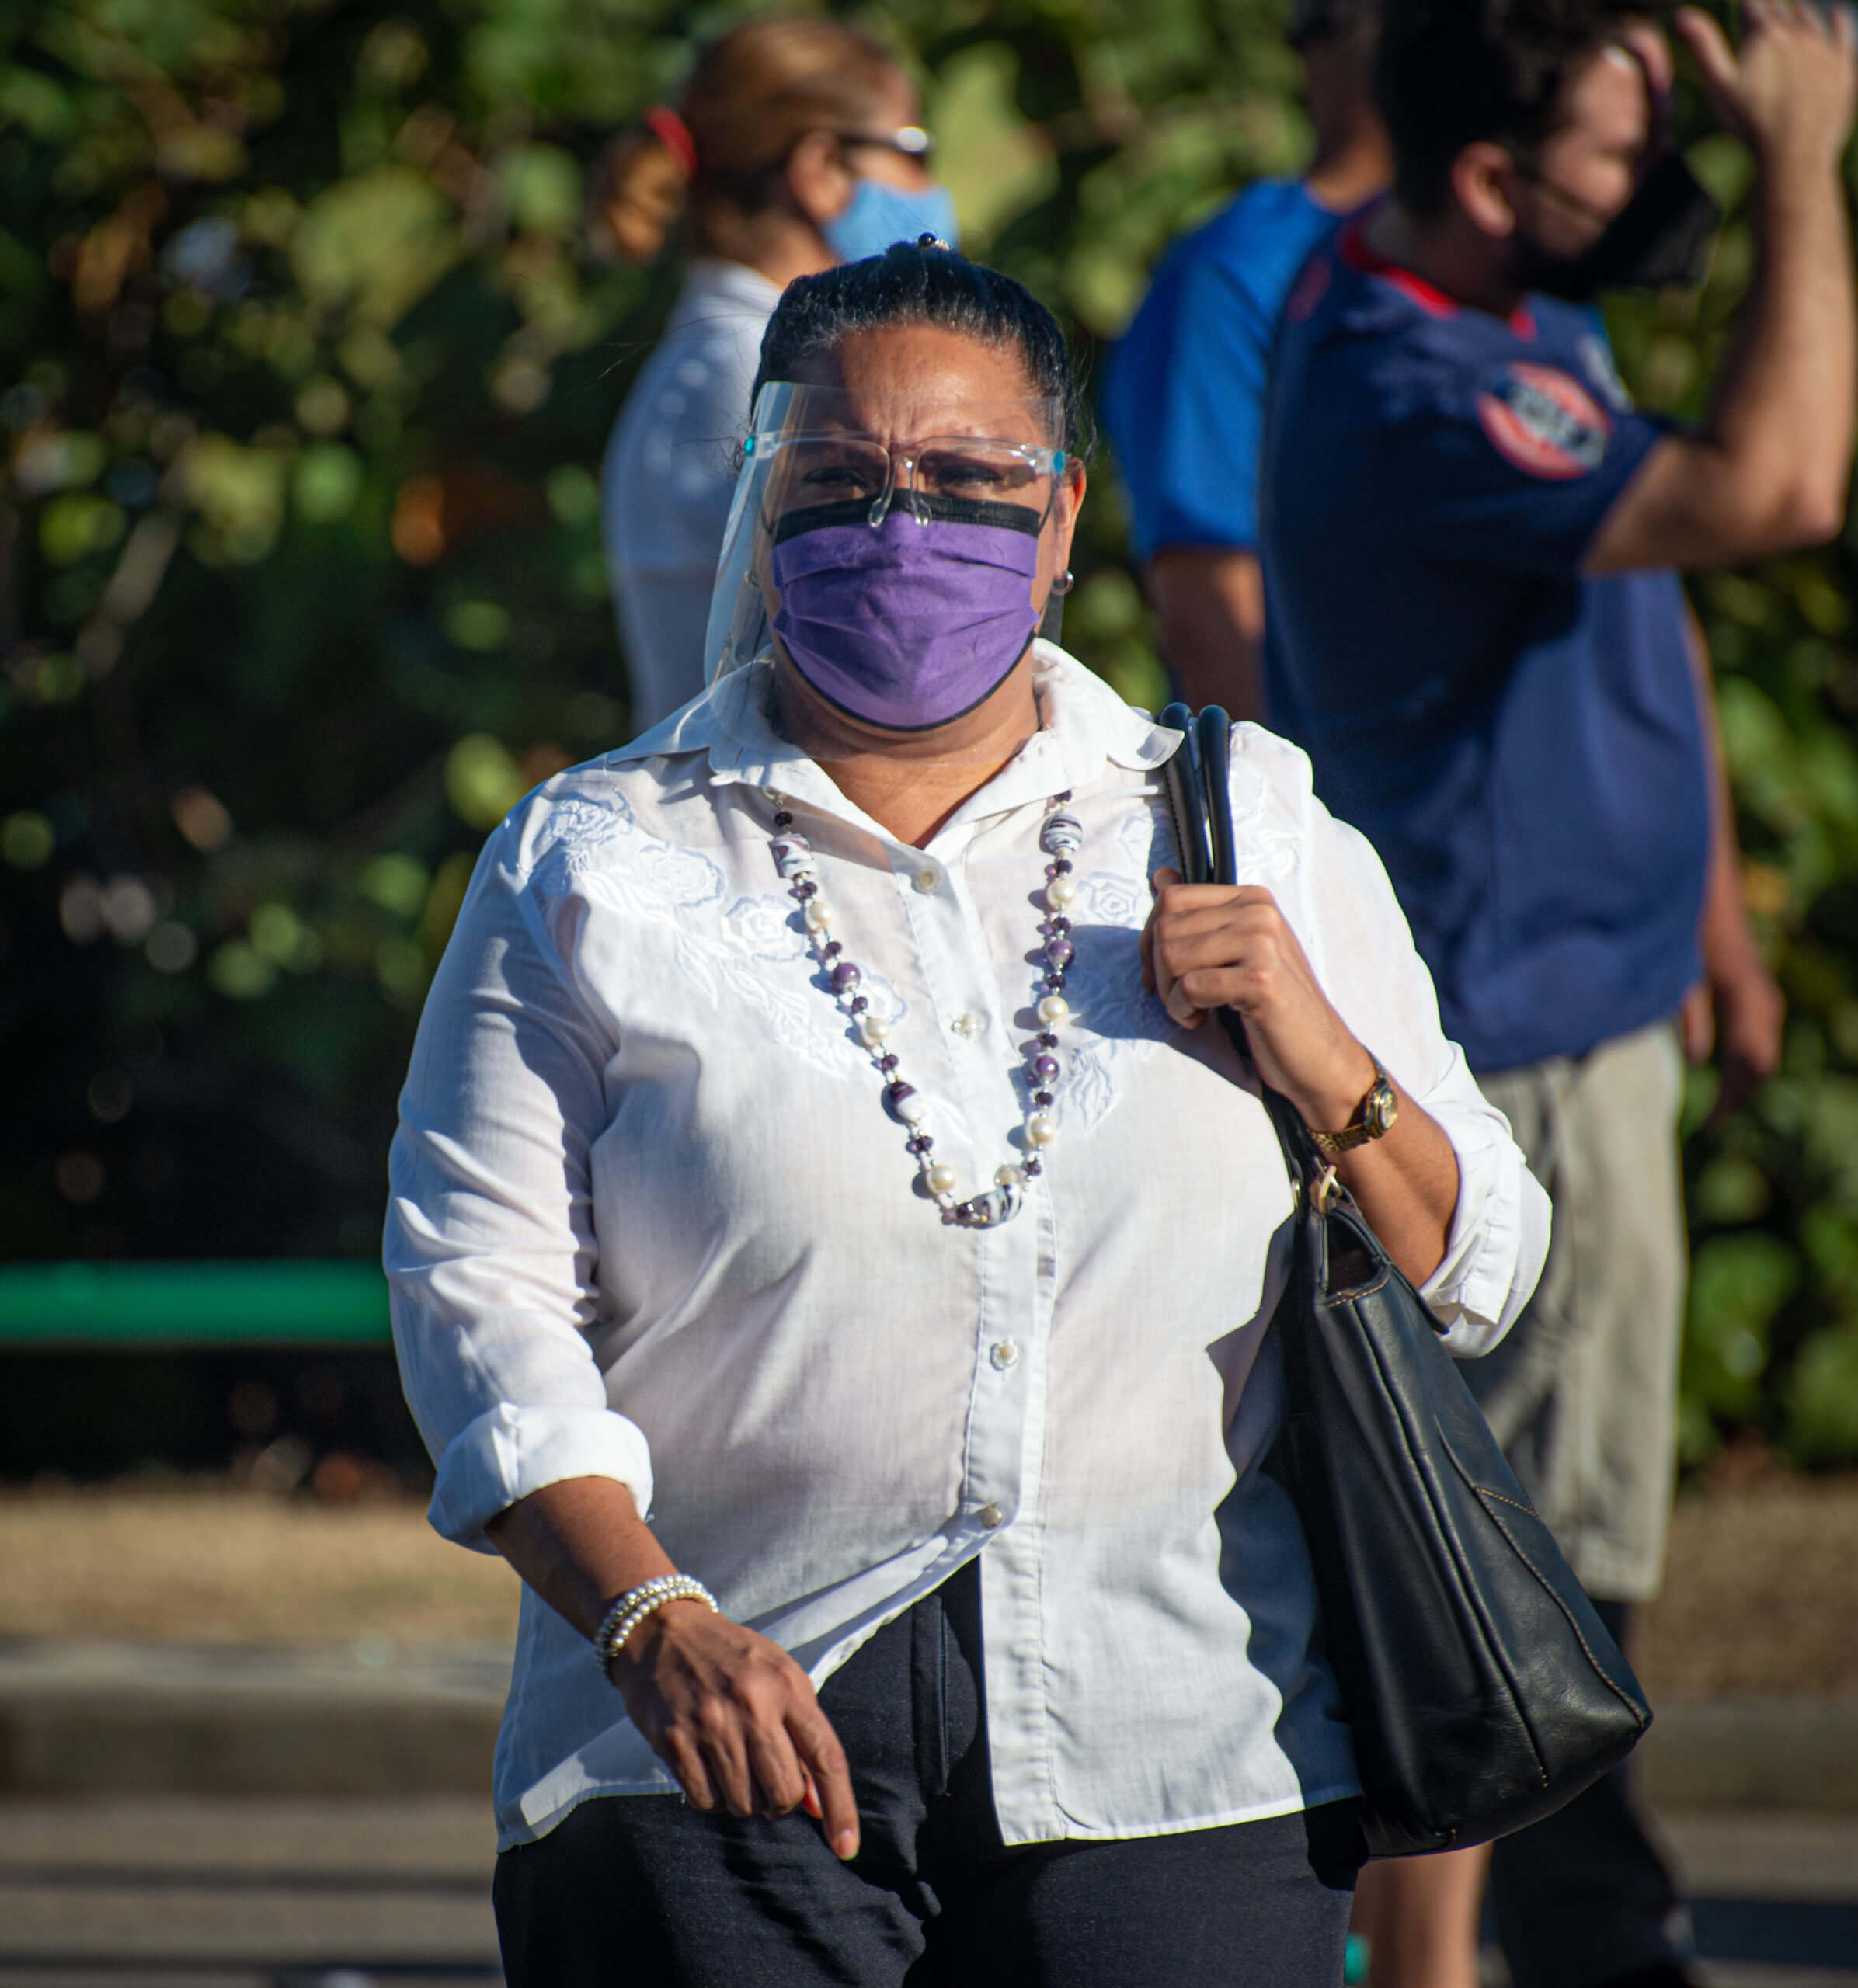 Some Cubans, such as this woman in Havana, take additional precautions in the face of the COVID-19 pandemic crisis. © 2022 John D. Elliott • www.TheHumanPulse.com